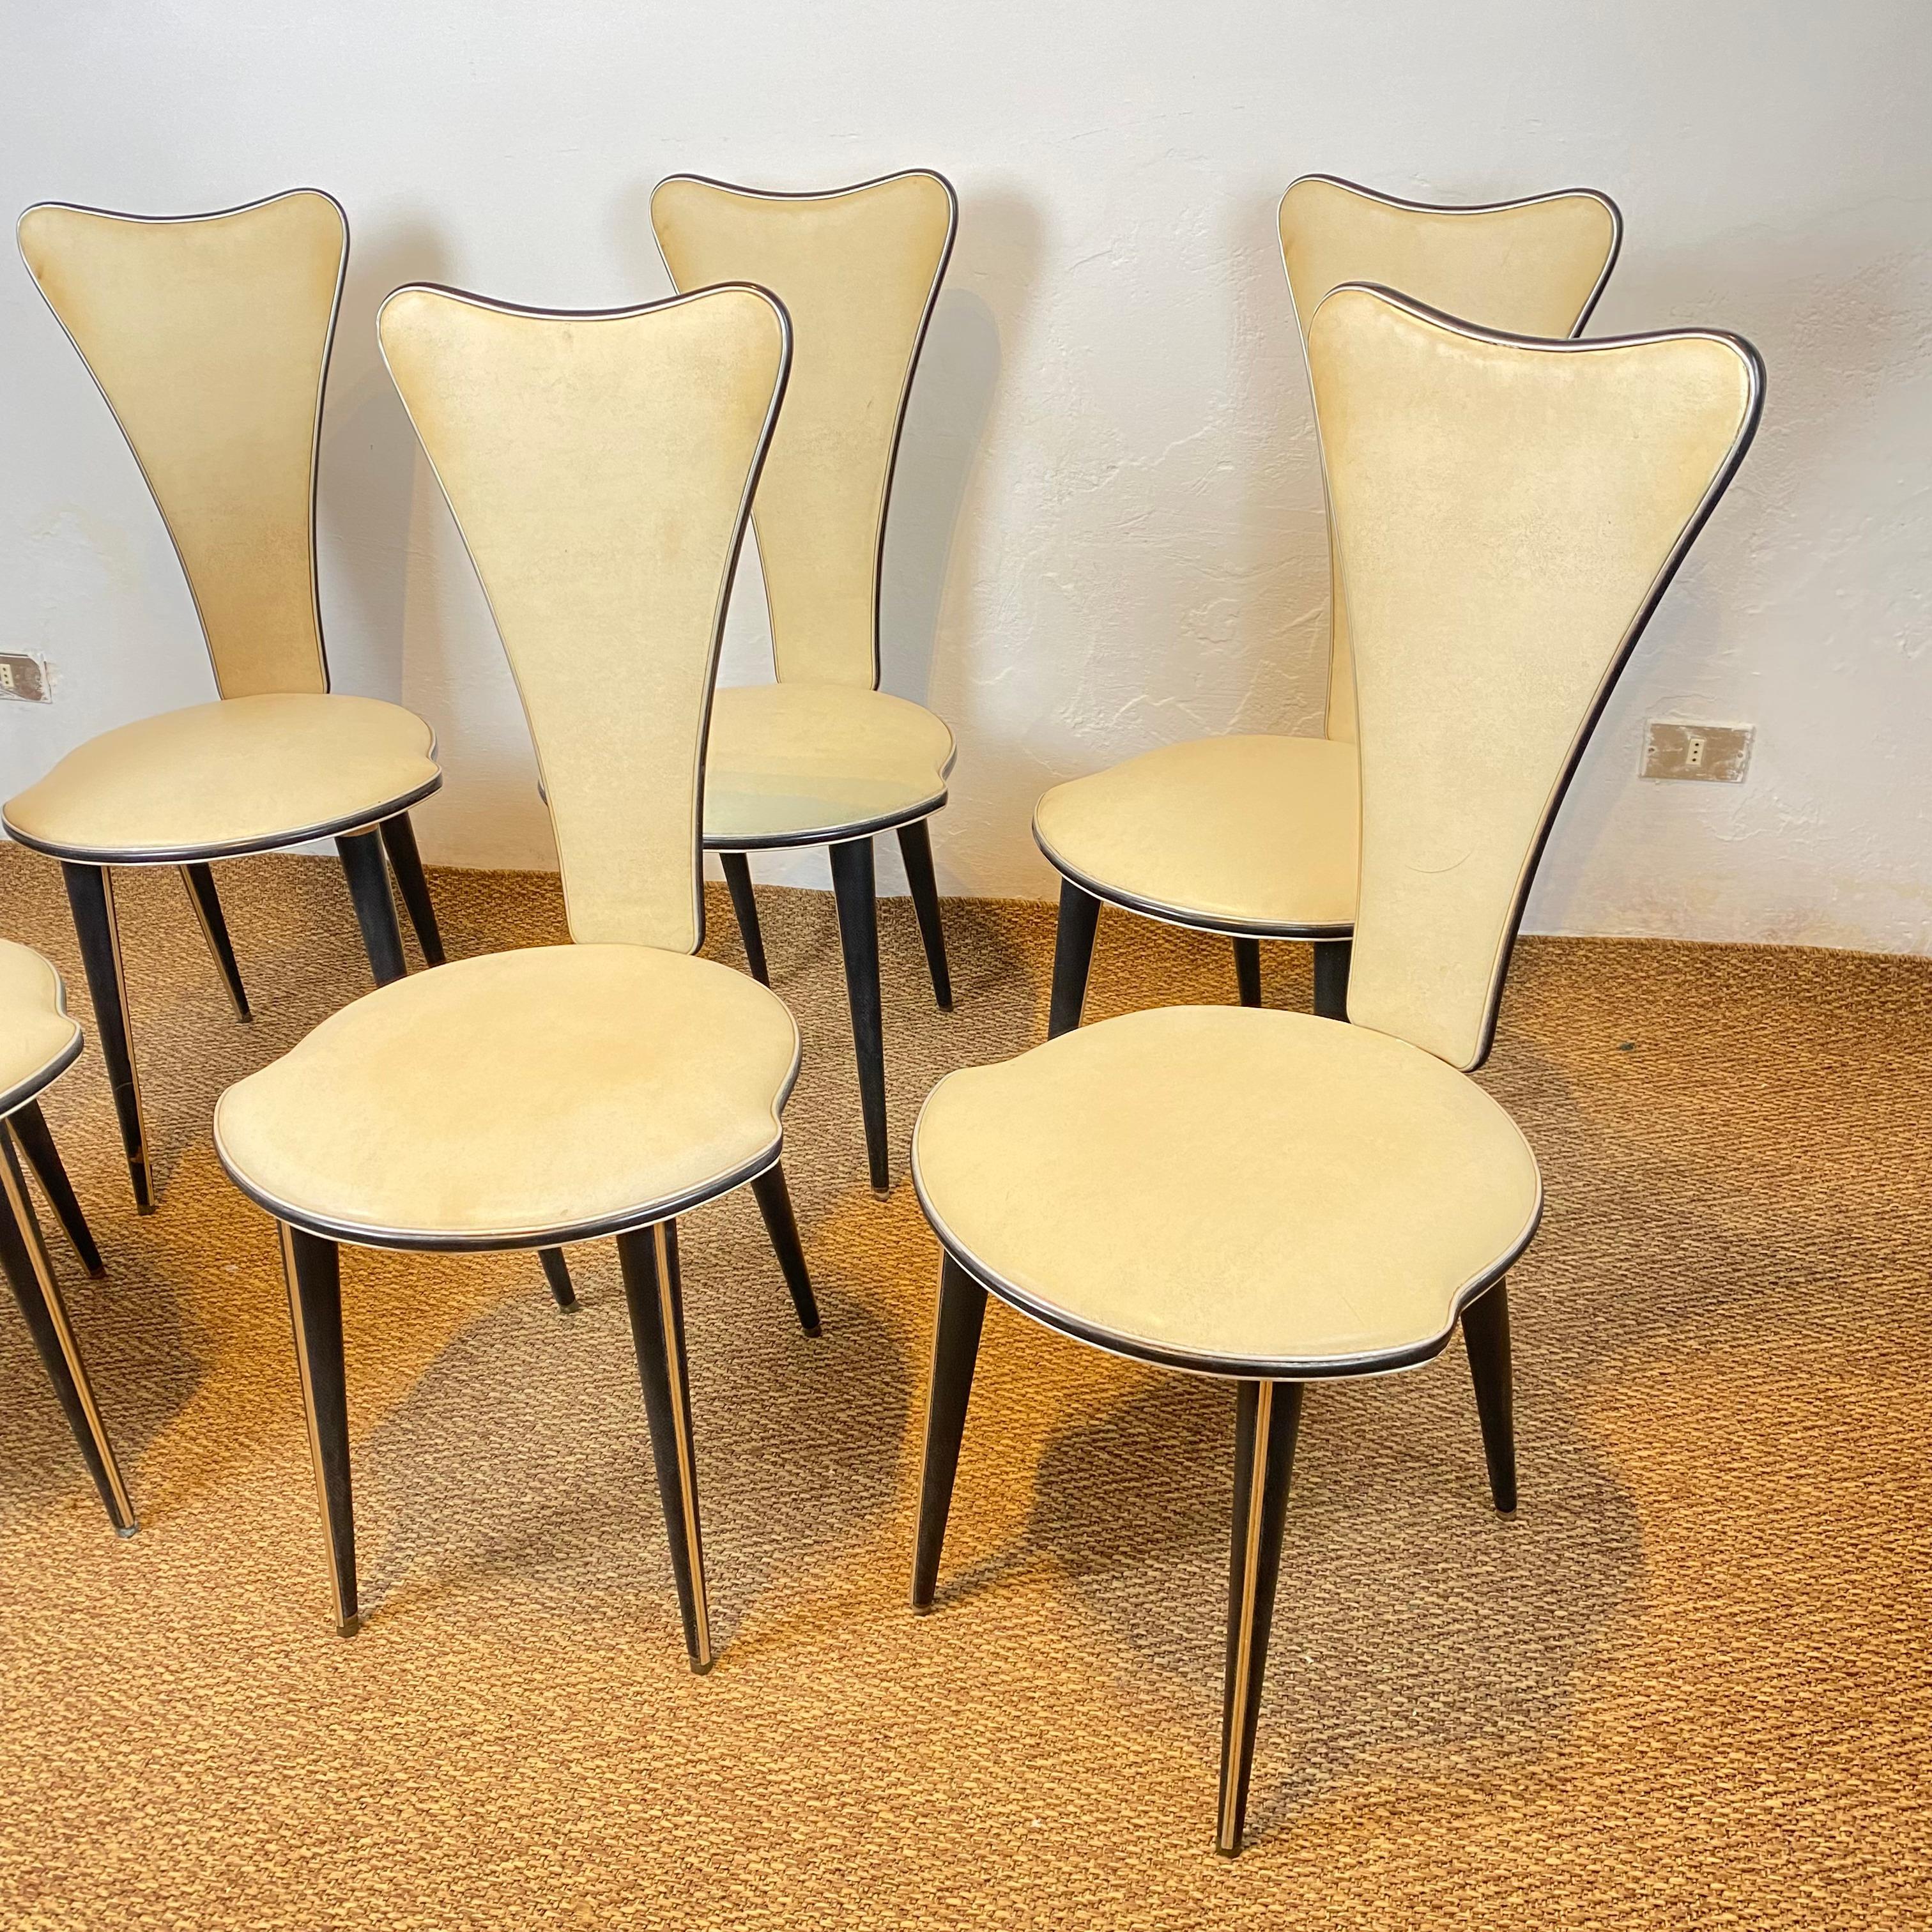 Mid-Century Modern Set of Six Chairs by Umberto Mascagni, 1950s